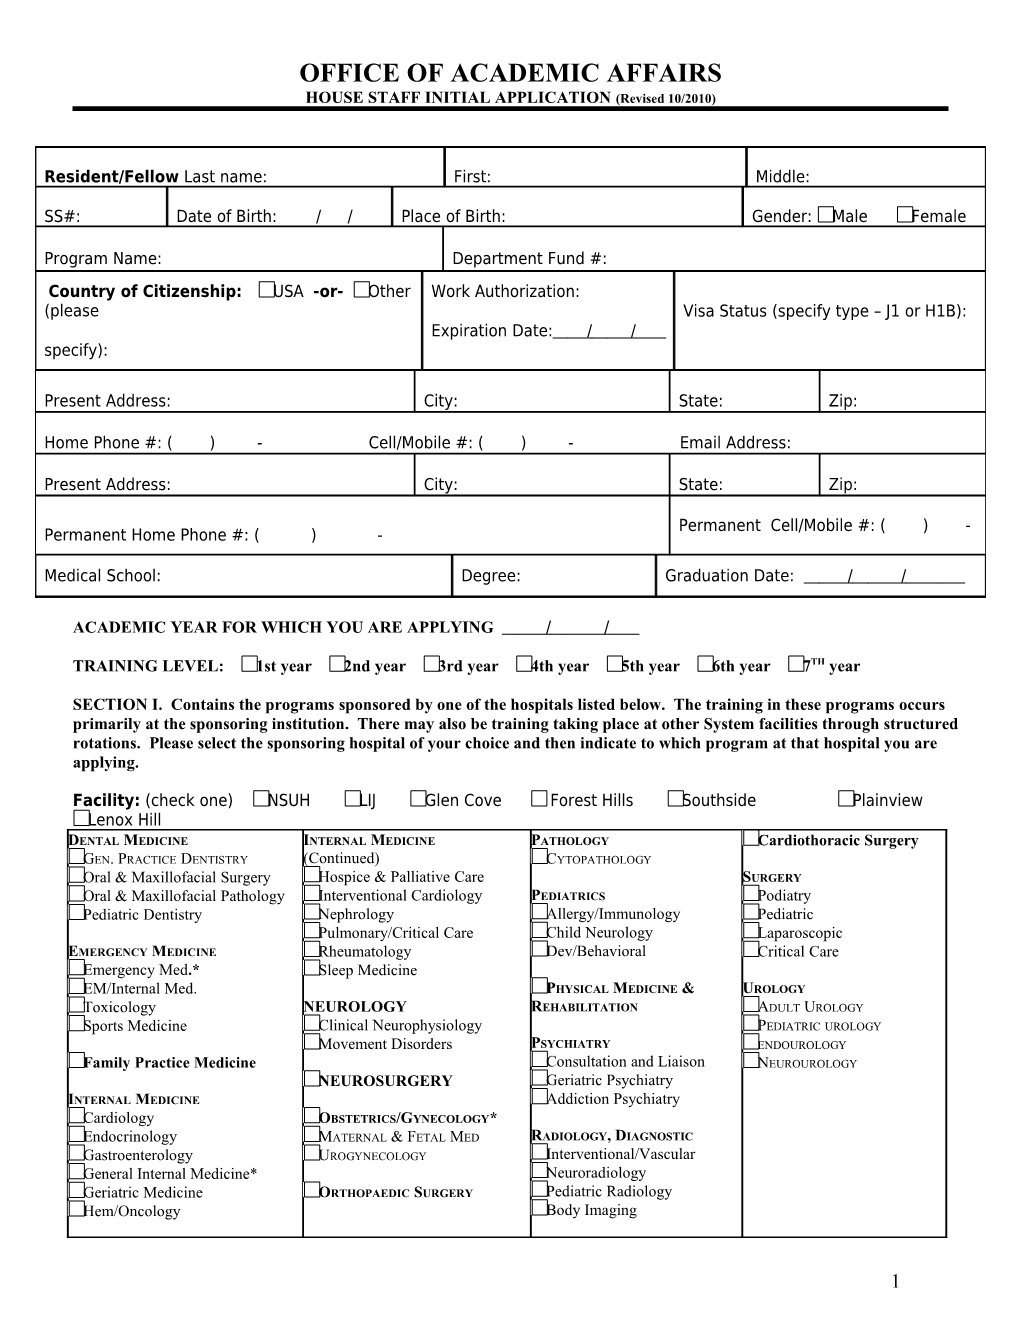 HOUSE STAFF INITIAL APPLICATION (Revised 10/2010)